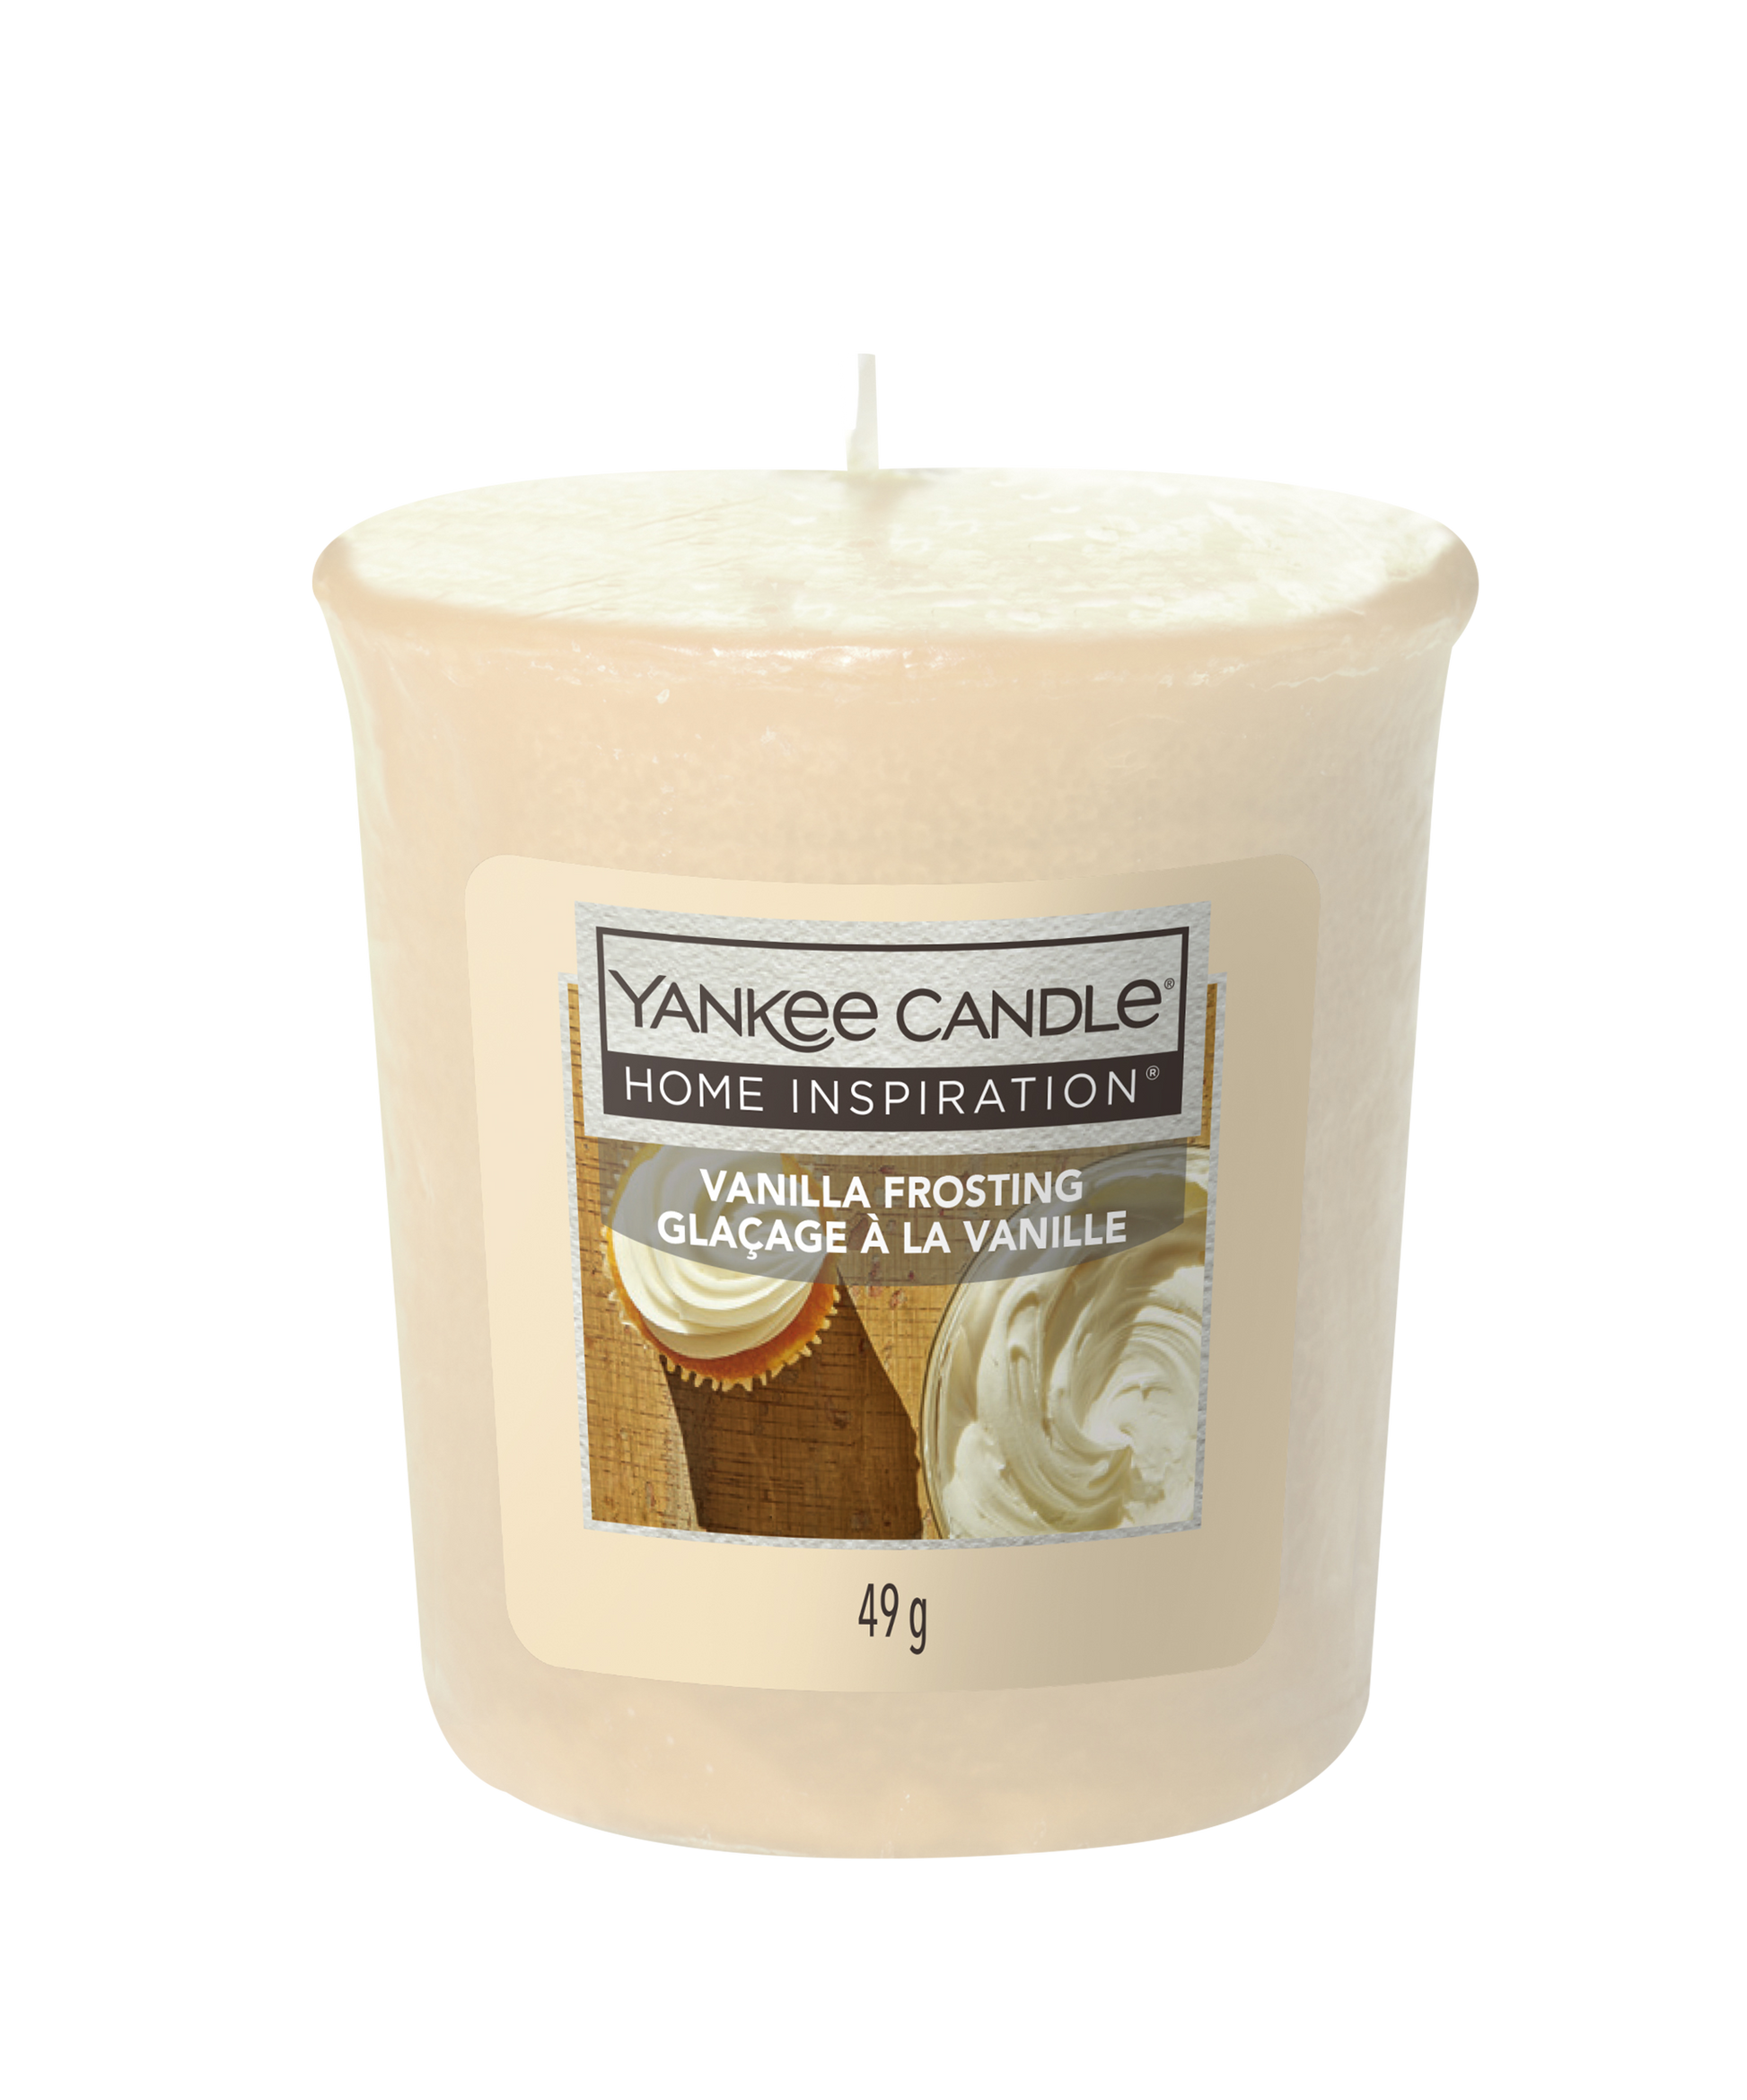 Vanilla Frosting Votive Surround yourself with the scent of creamy, sugary confections with this Yankee Candle® Home Inspiration® fragrance. This candle provides top notes of confectionary sugar and milky accord.